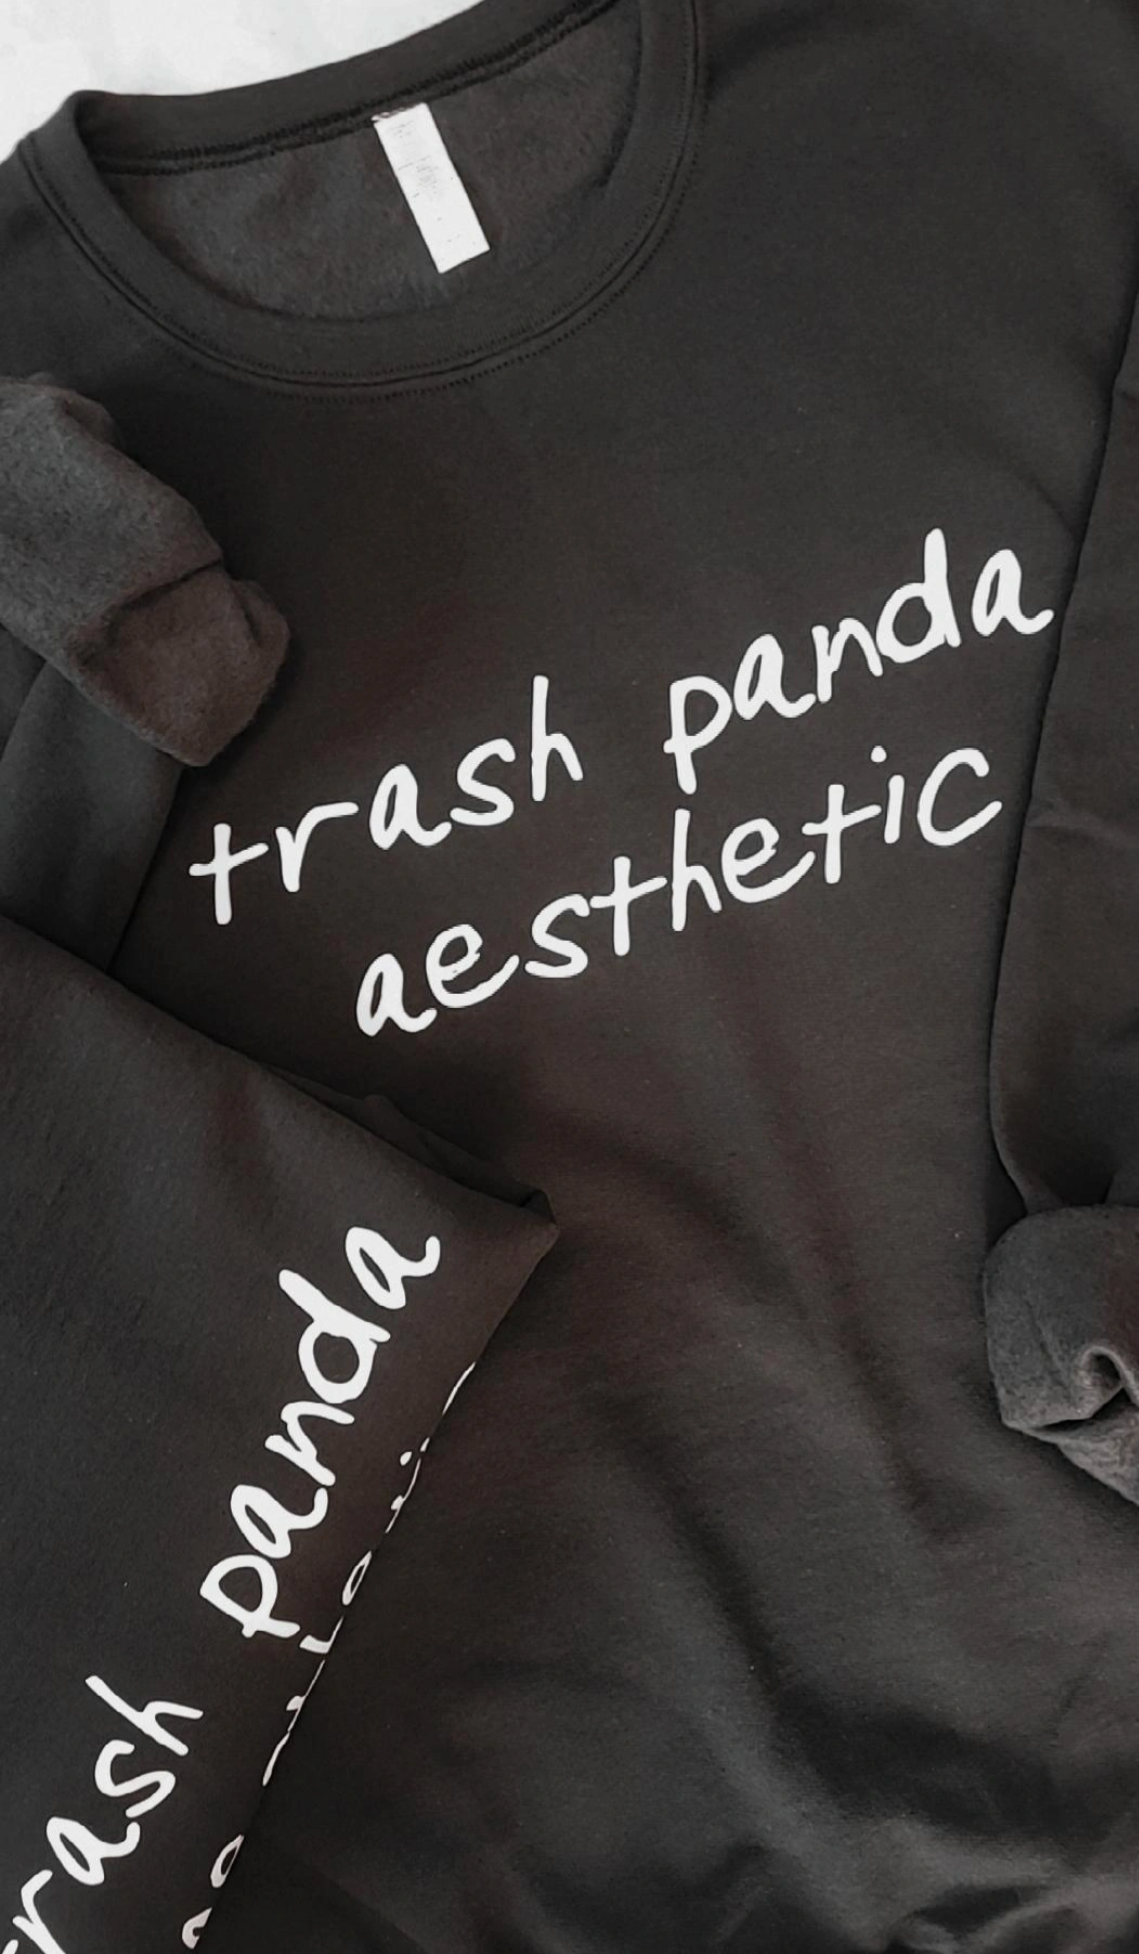 Two black sweatshirts with white text that reads, "trash panda aesthetic" written across the chest